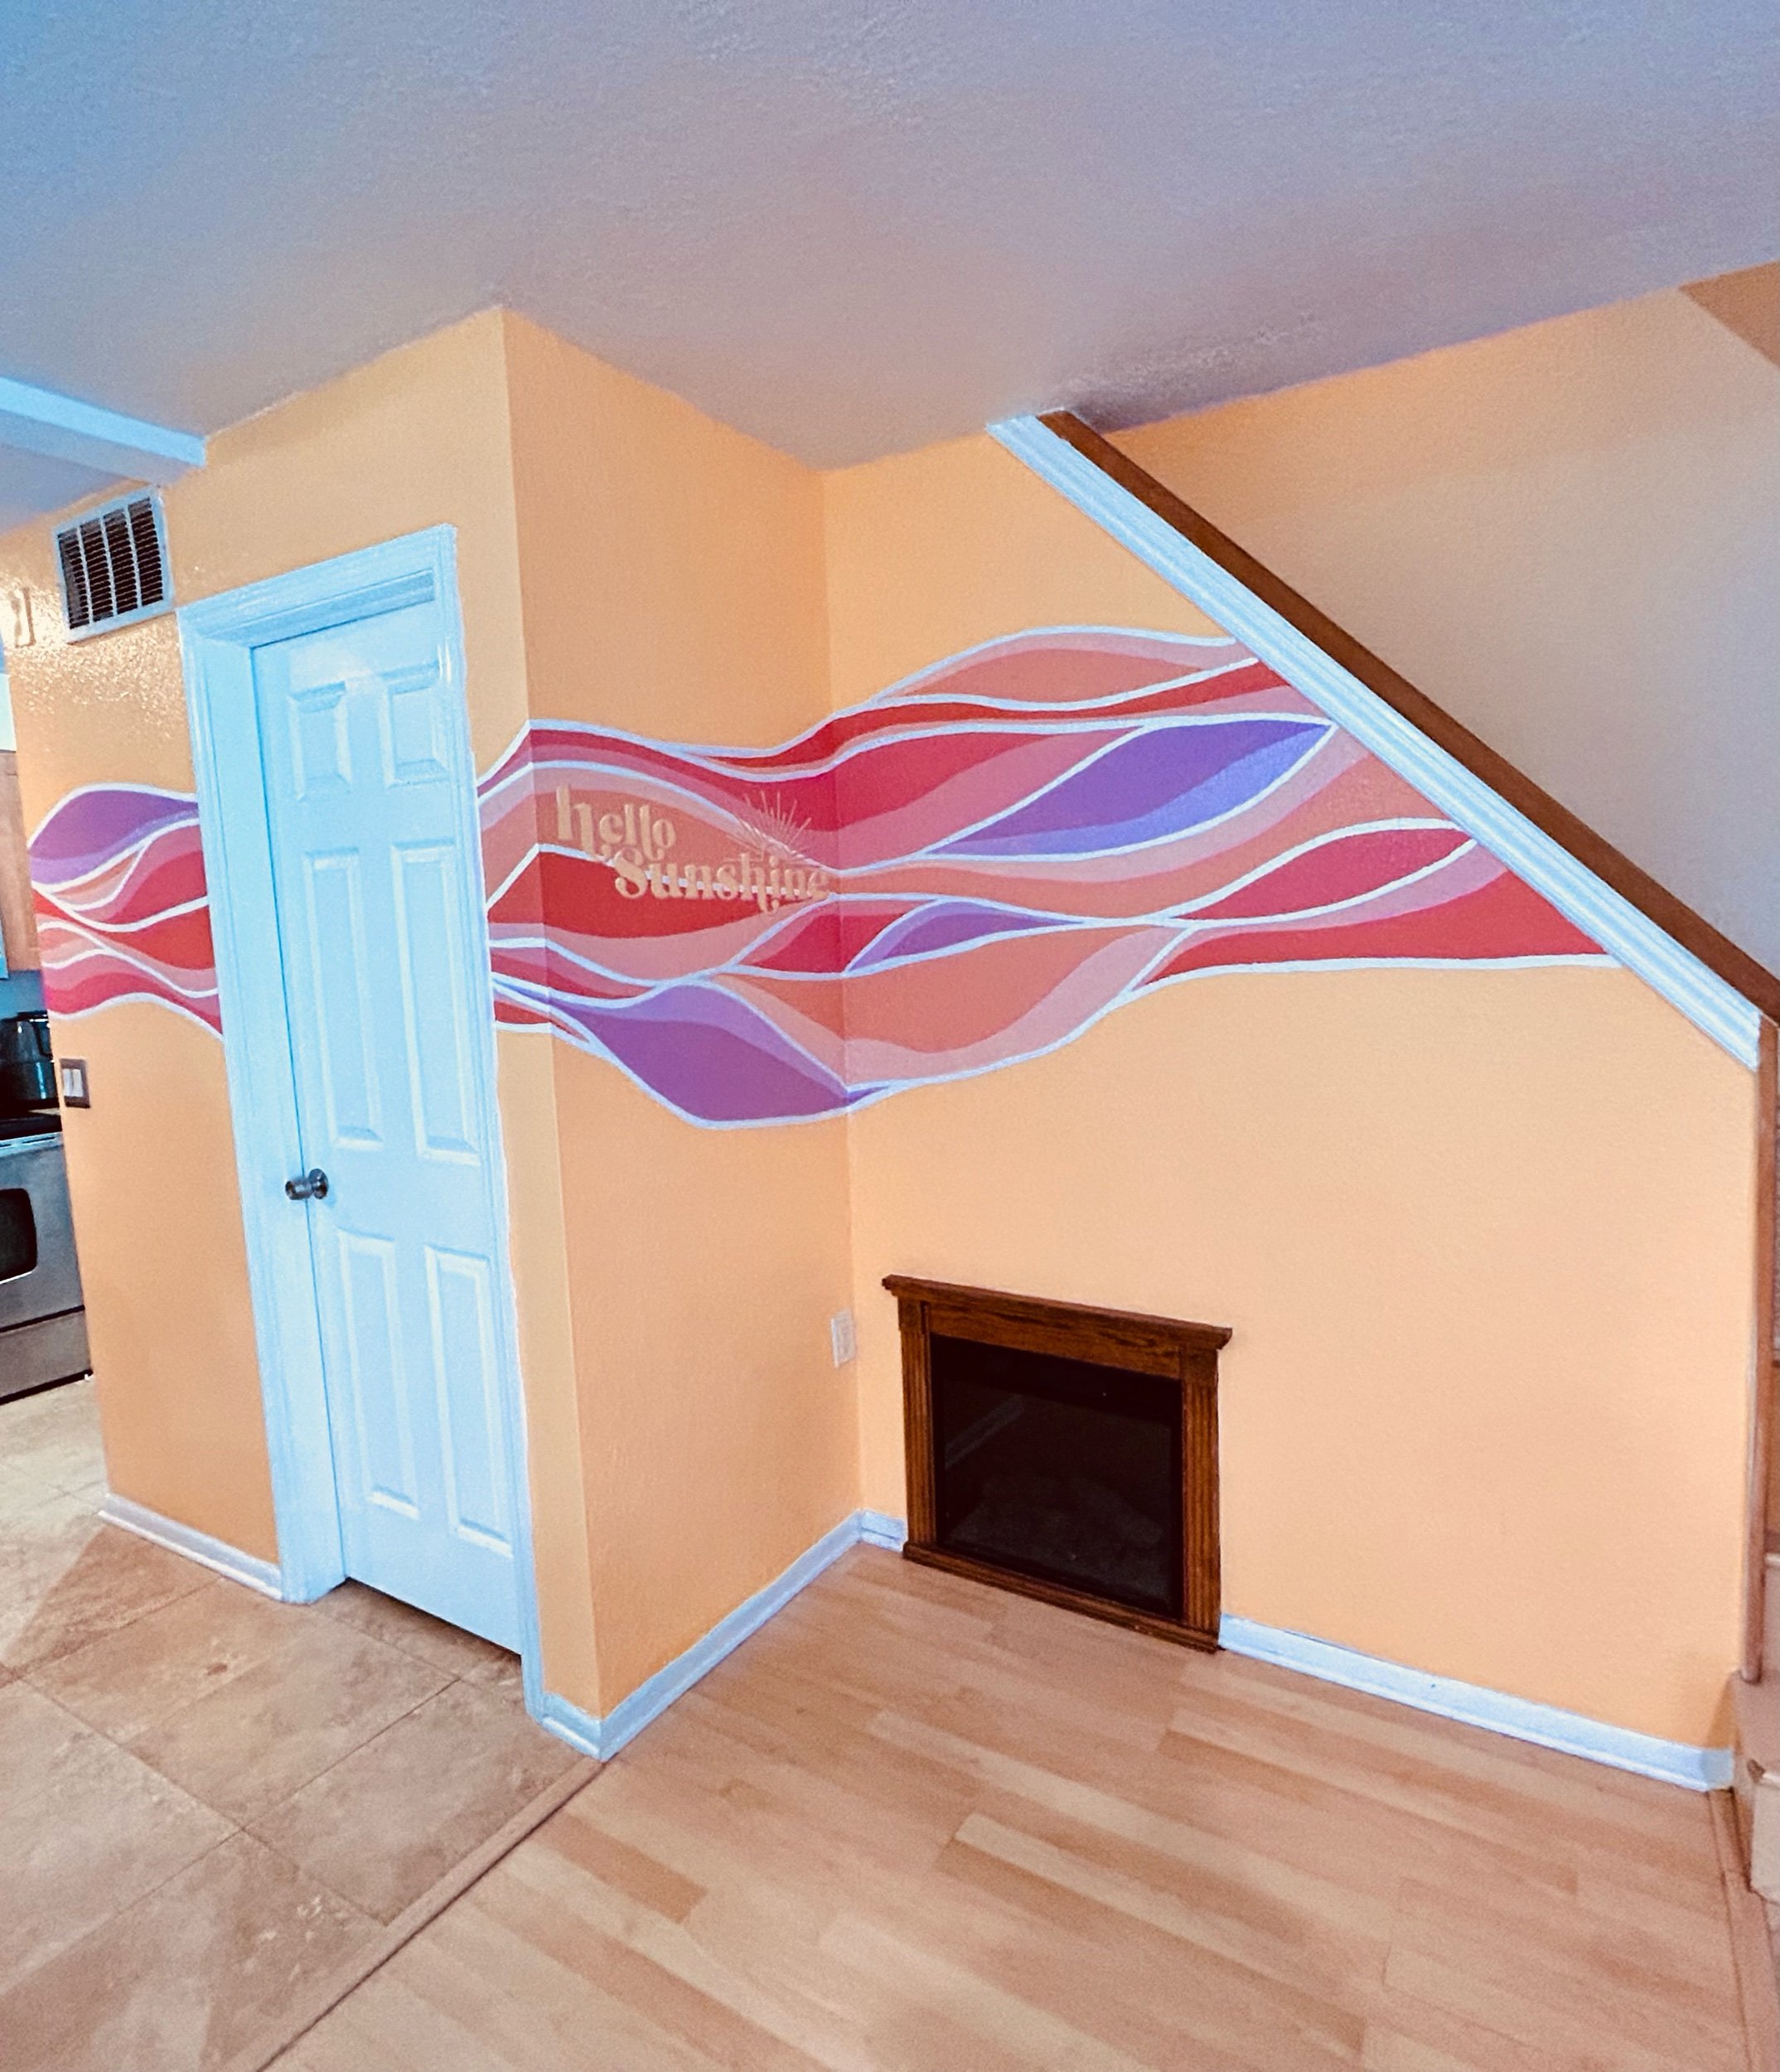 Abstract waves mural